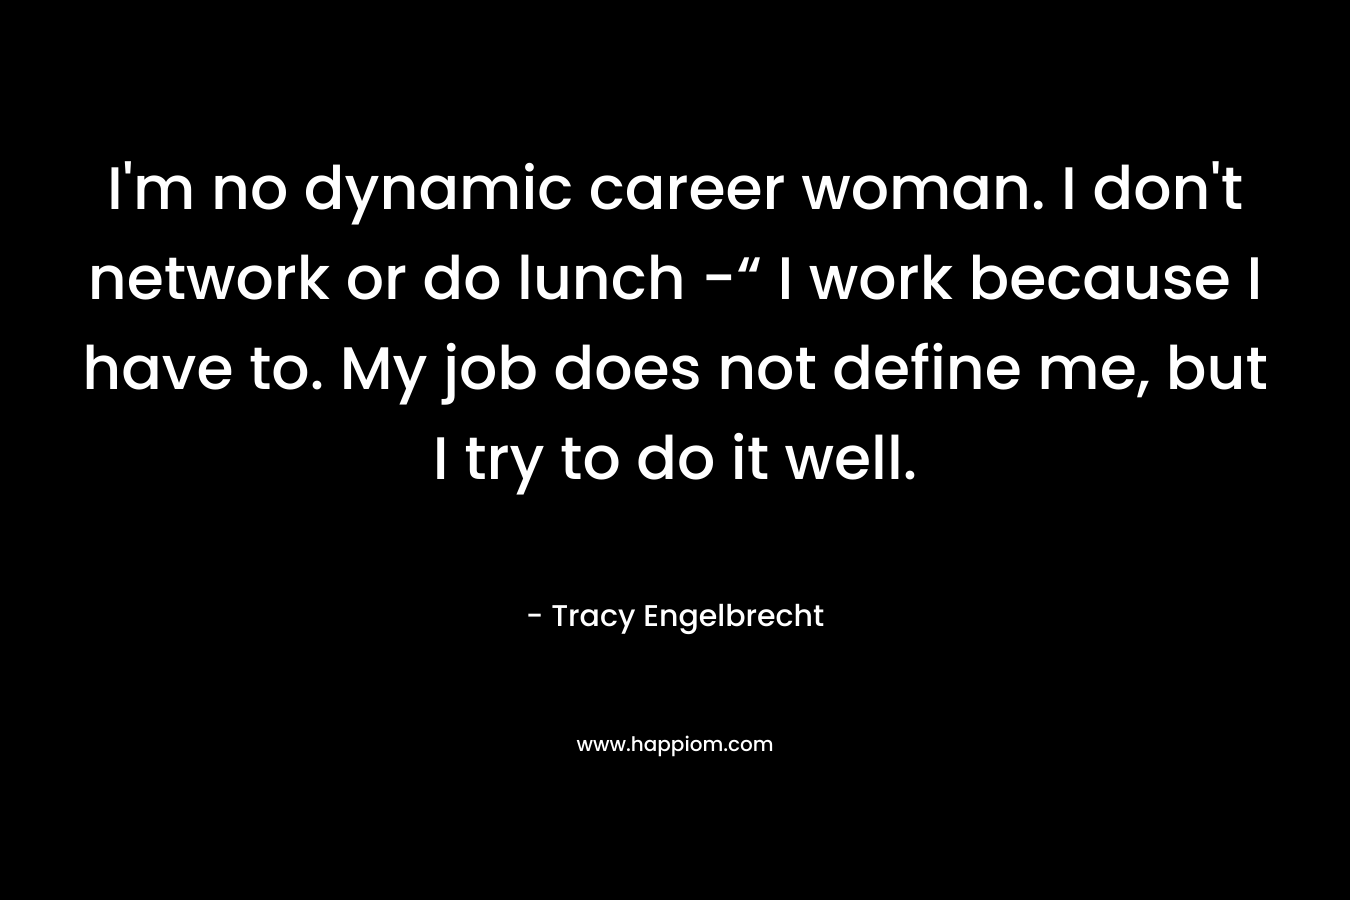 I’m no dynamic career woman. I don’t network or do lunch -“ I work because I have to. My job does not define me, but I try to do it well. – Tracy Engelbrecht